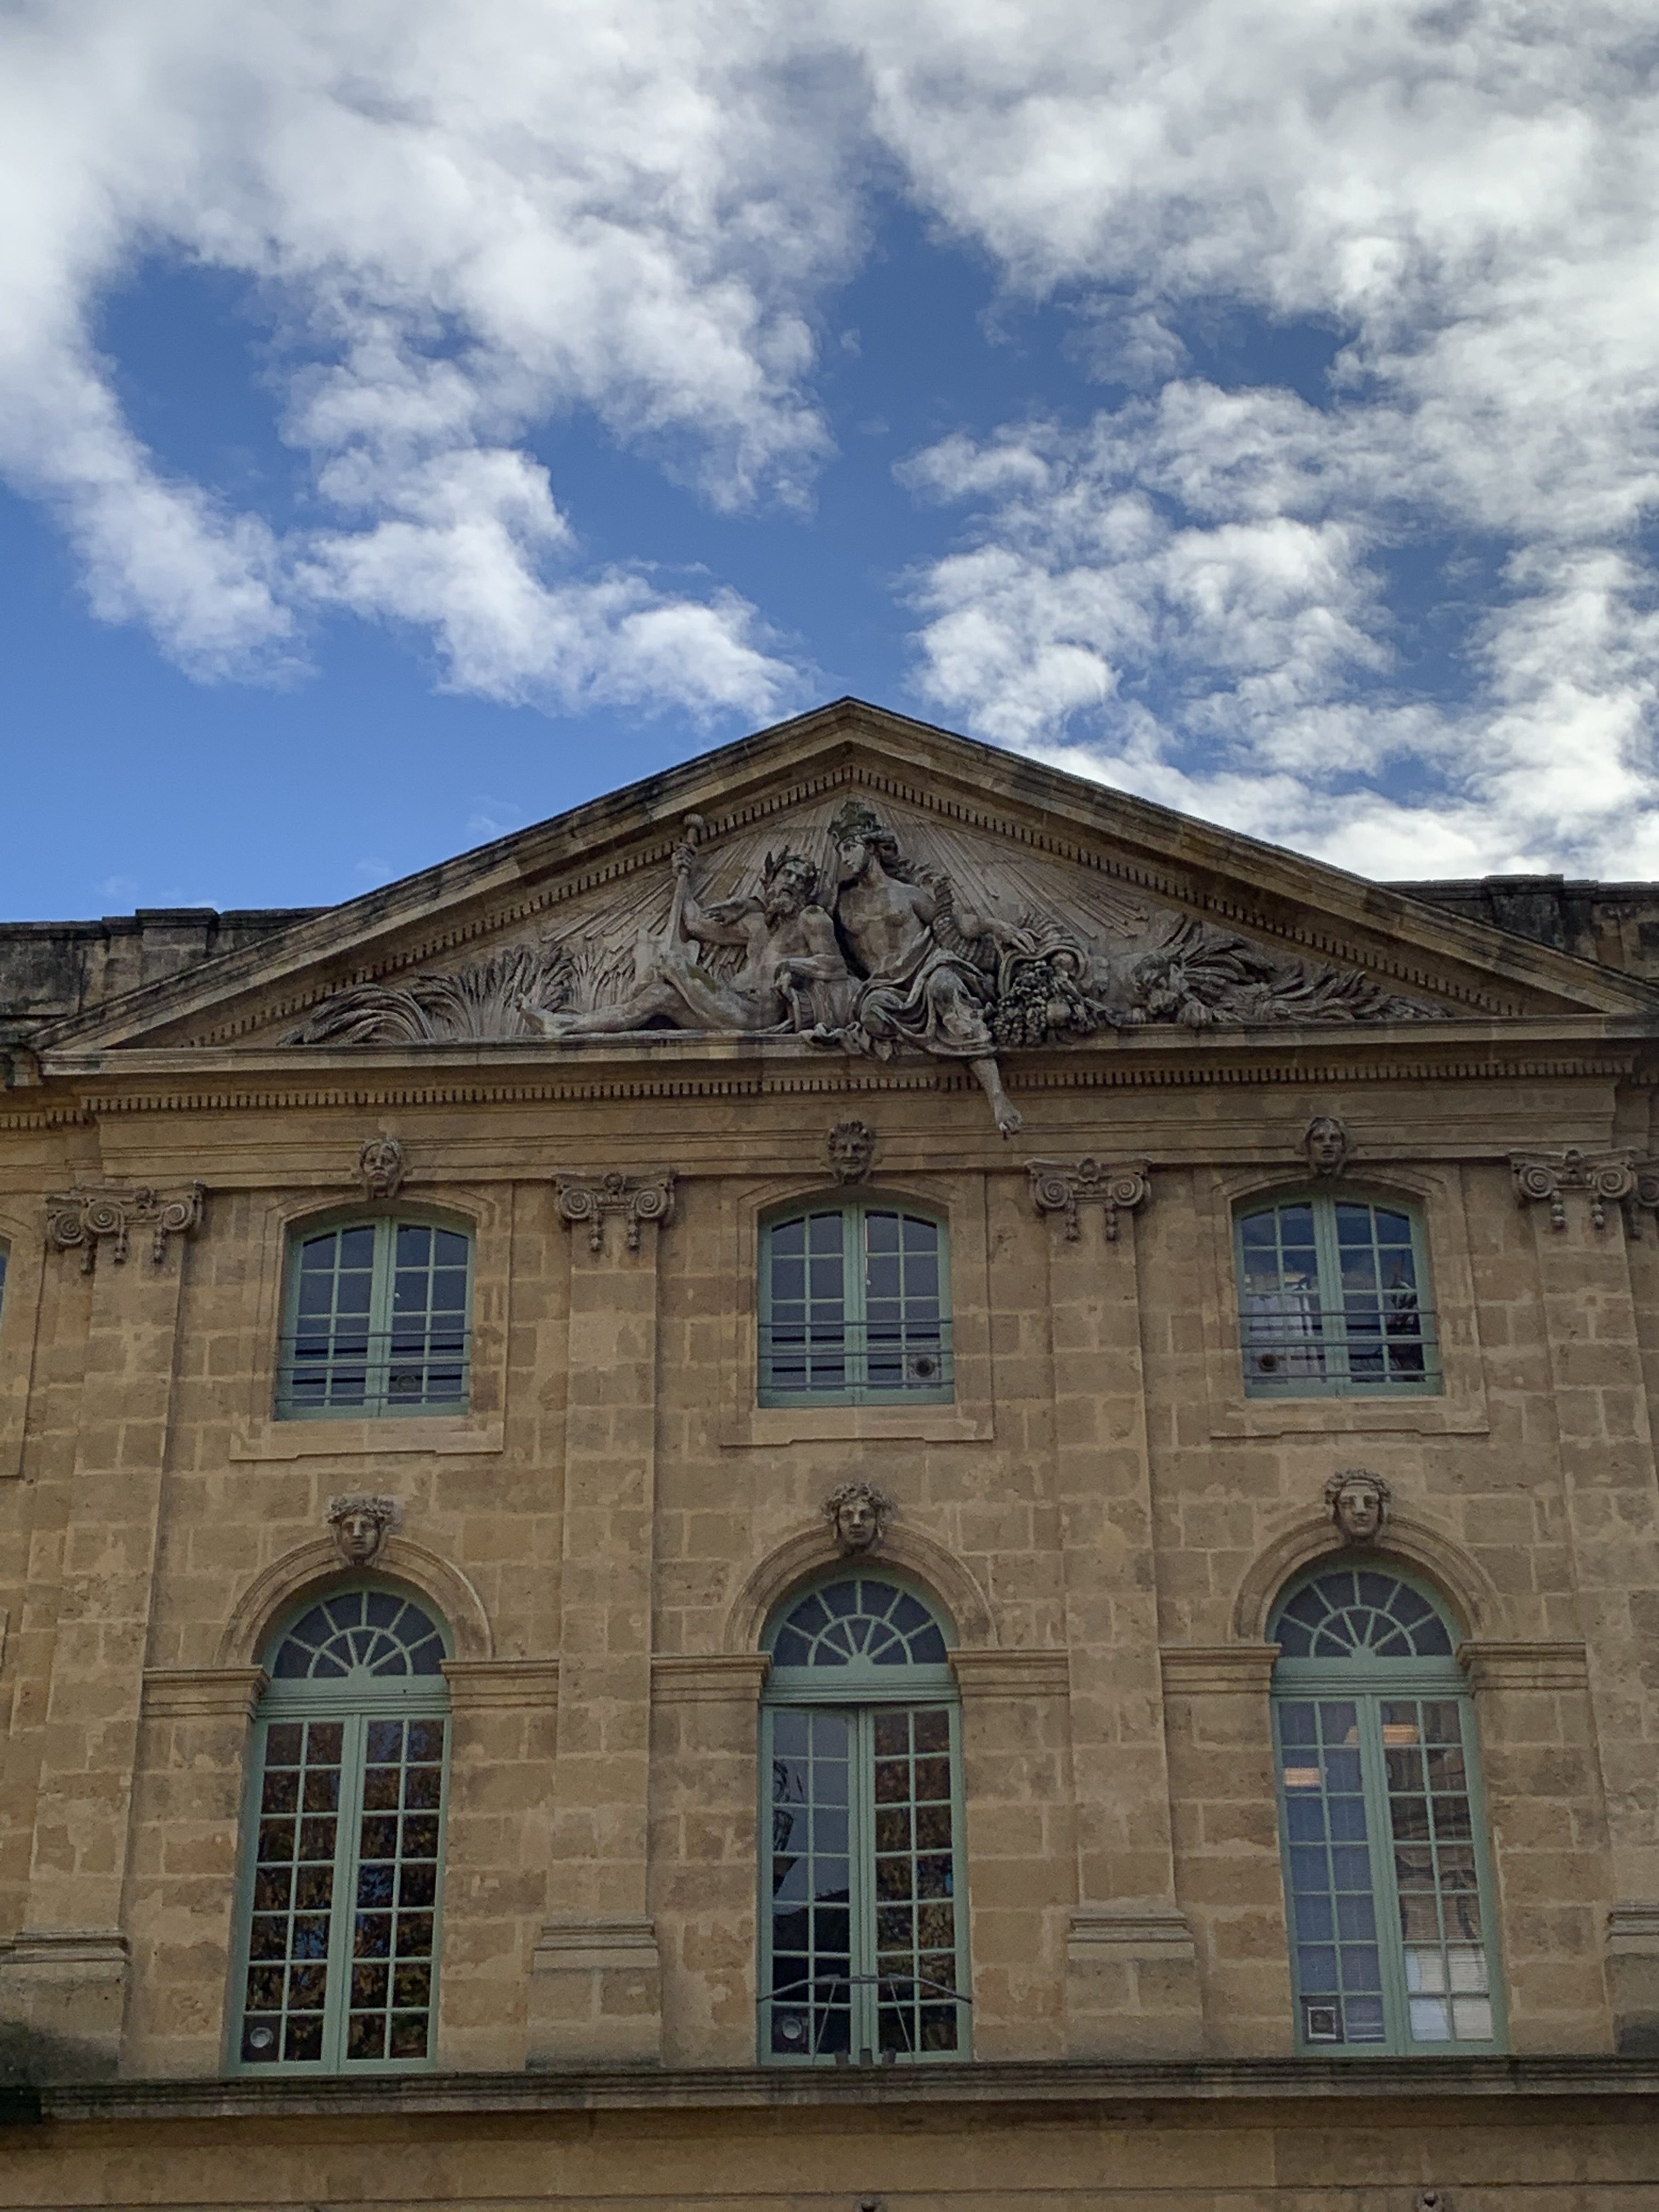 A historic building in Aix, France, with statuary along the top